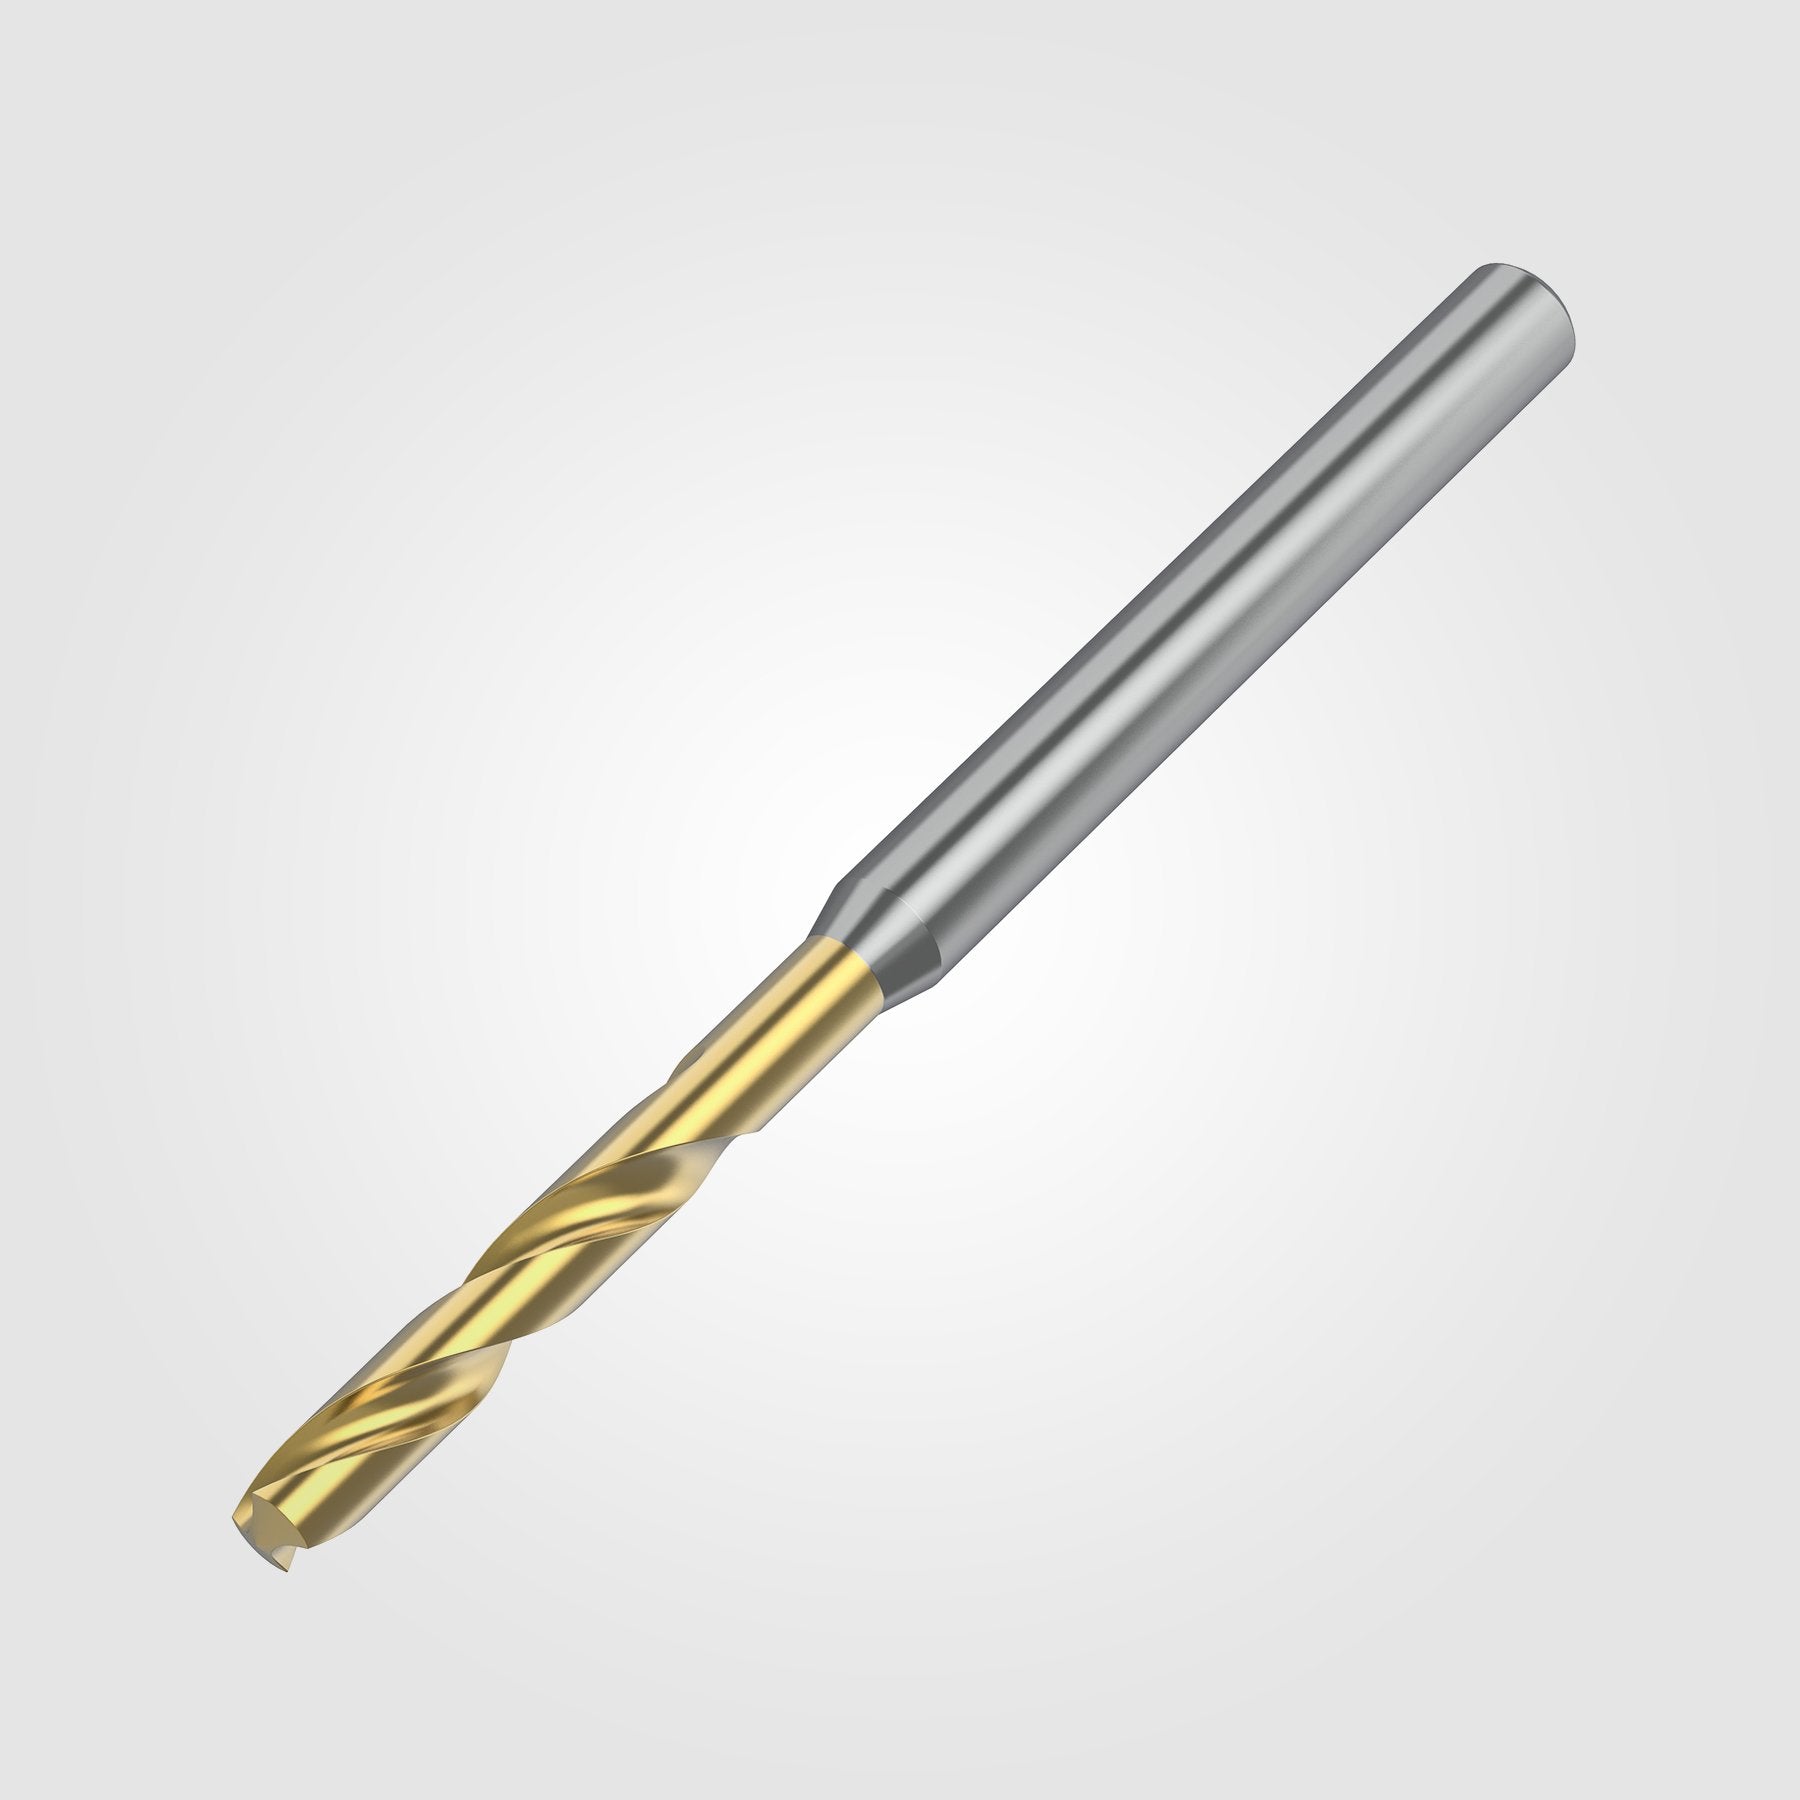 GOdrill (THROUGH COOLANT) | 14.8mm / .5827" / 3xD | SOLID CARBIDE DRILL | 4151261